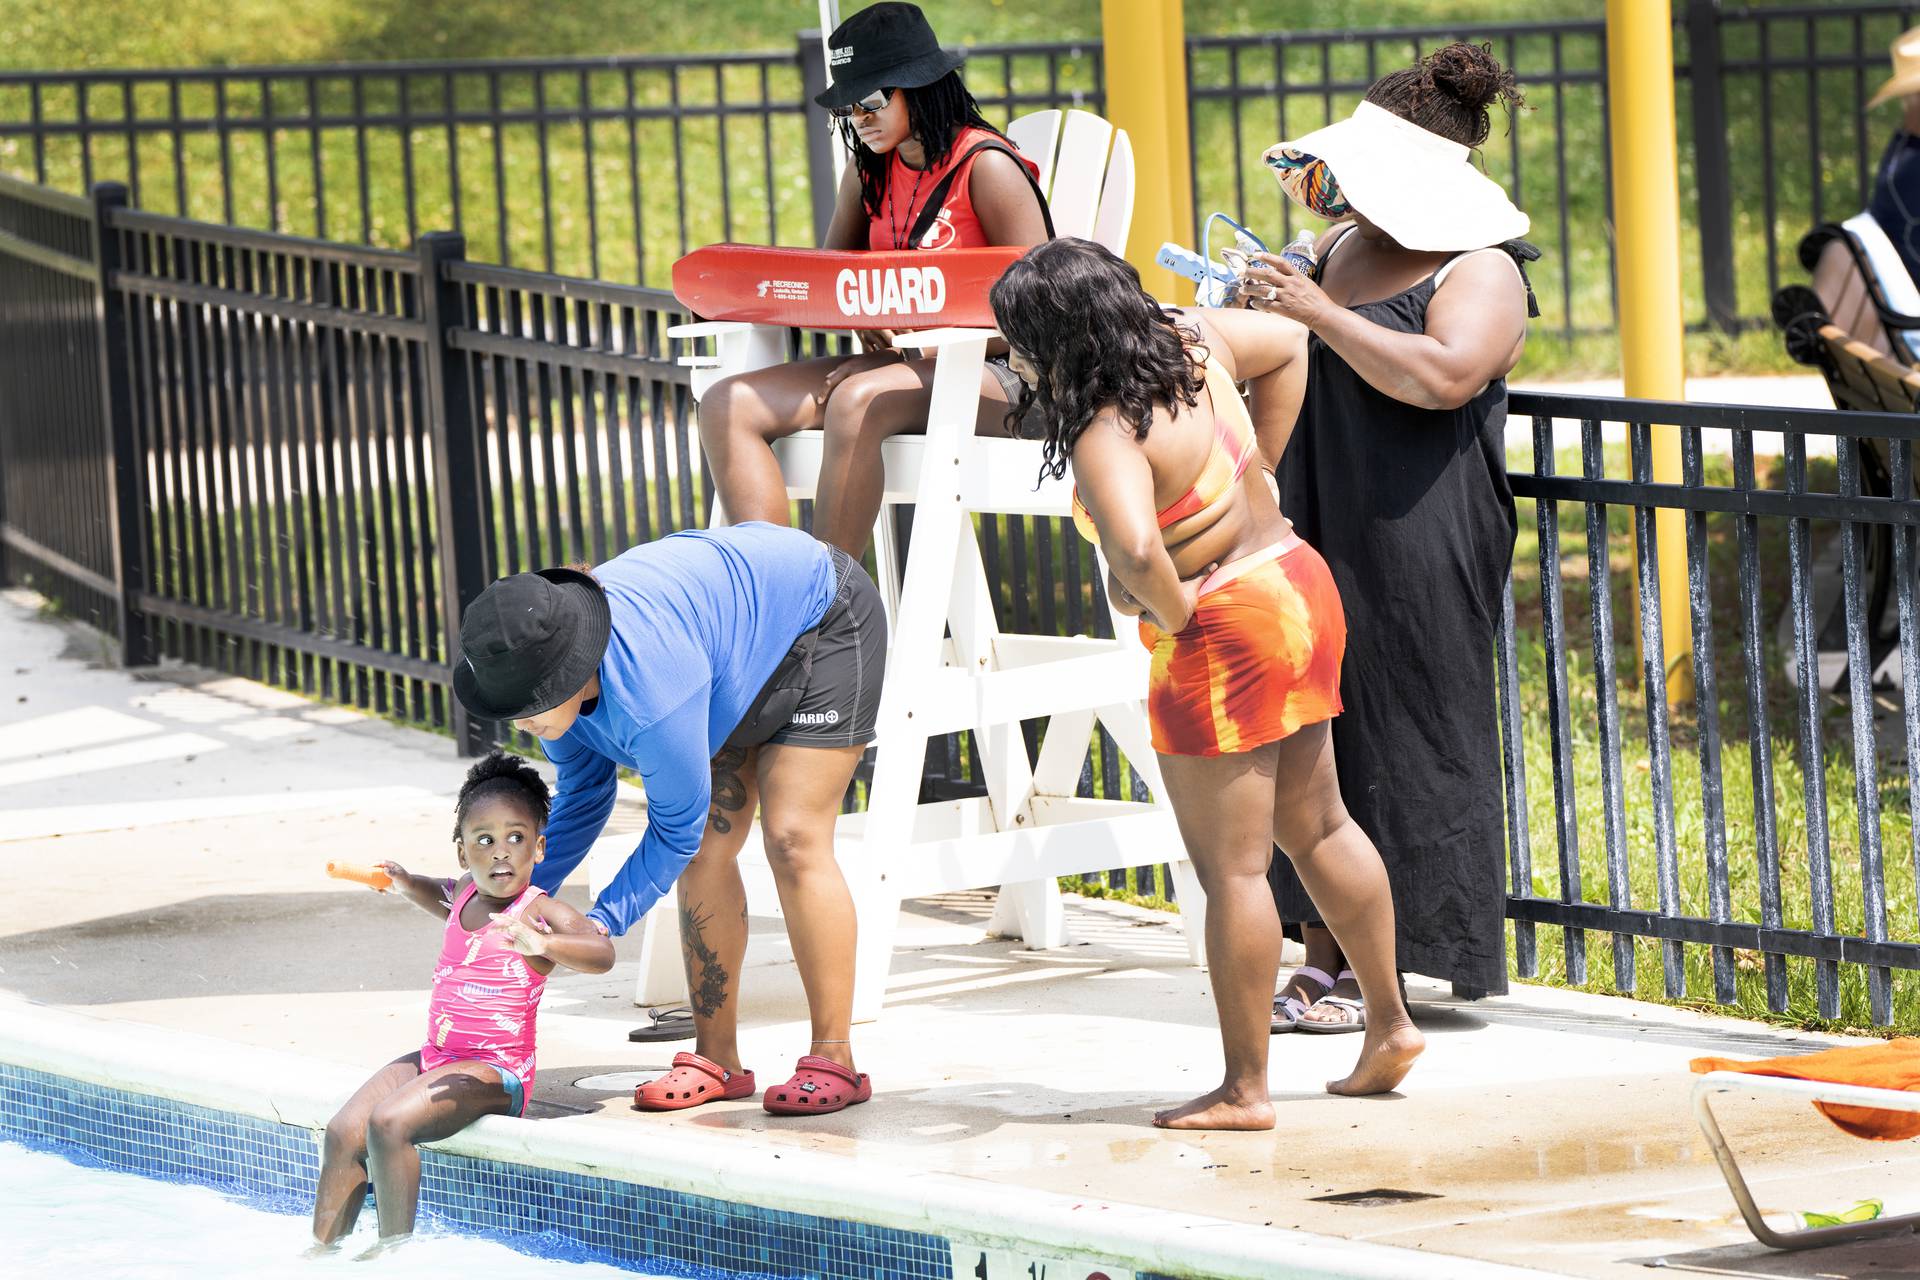 Roosevelt Park Pool and most of the other city pools are opening, some with extended hours, after a lifeguard shortage caused closures over the last few years since the pandemic. Pool goers don't need to worry about that this year!